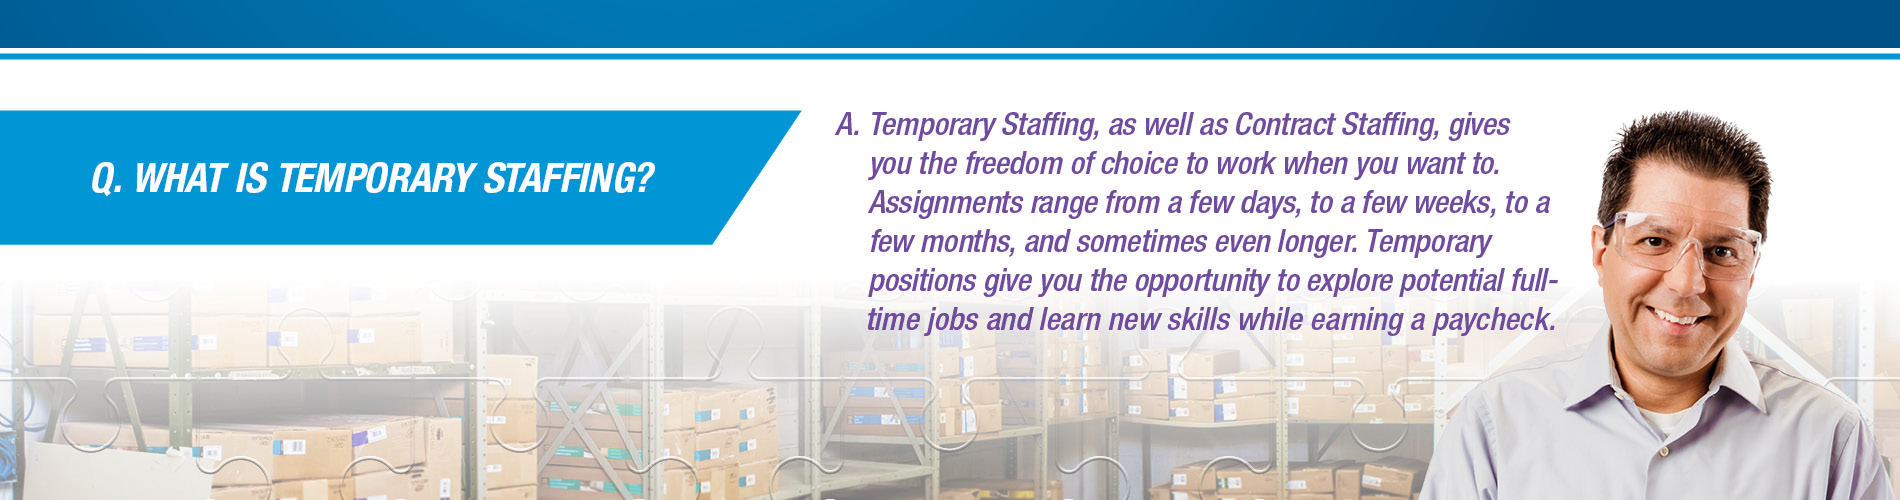 What Is Express? - What Is Temporary Staffing?